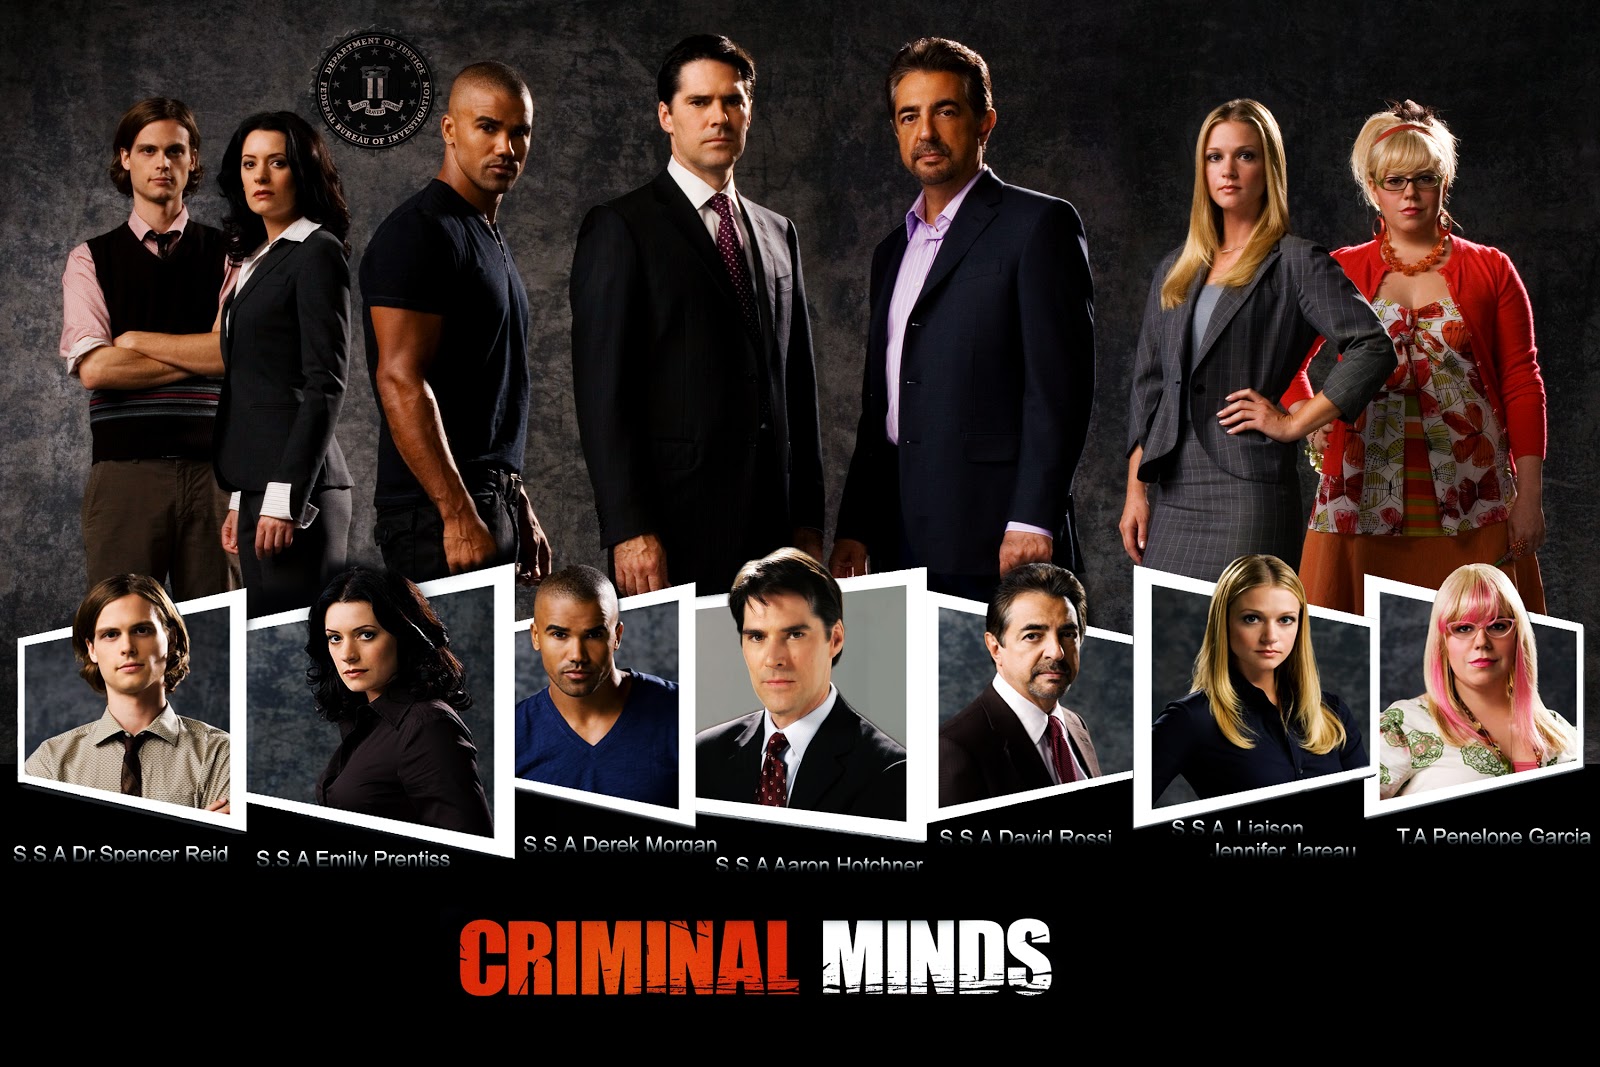 Criminal Minds Postes | Tv Series Posters and Cast1600 x 1067